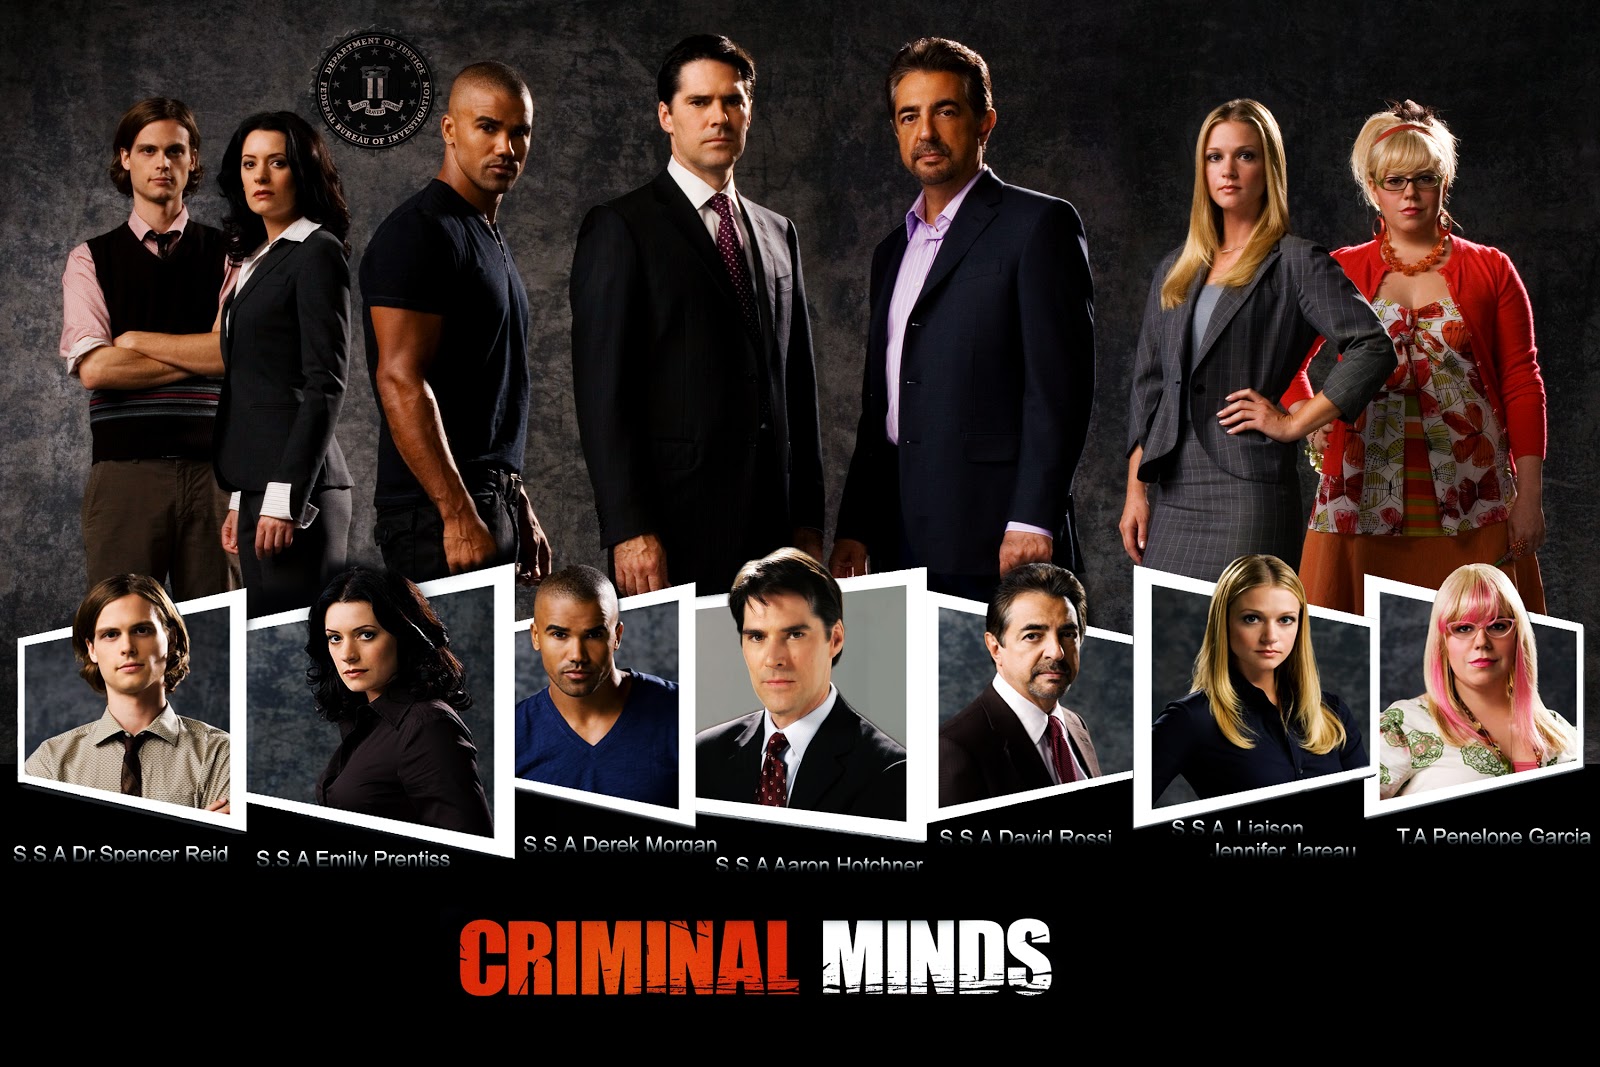 Criminal Minds Postes | Tv Series Posters and Cast1600 x 1067